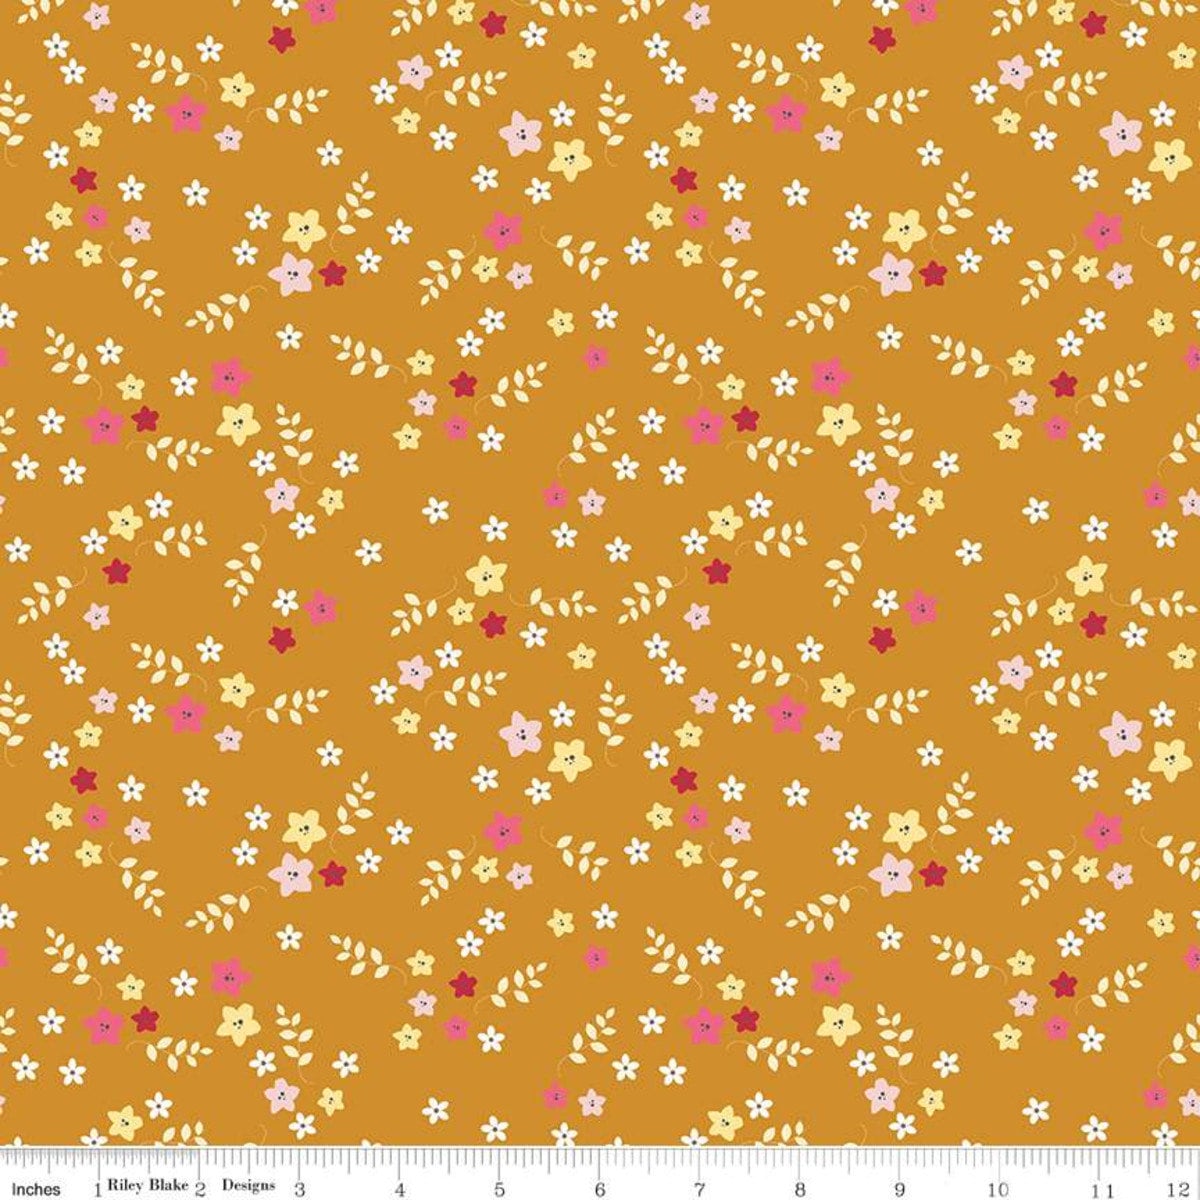 Floral Butterscotch by Flamingo Toes for Riley Blake Designs Stardust Line